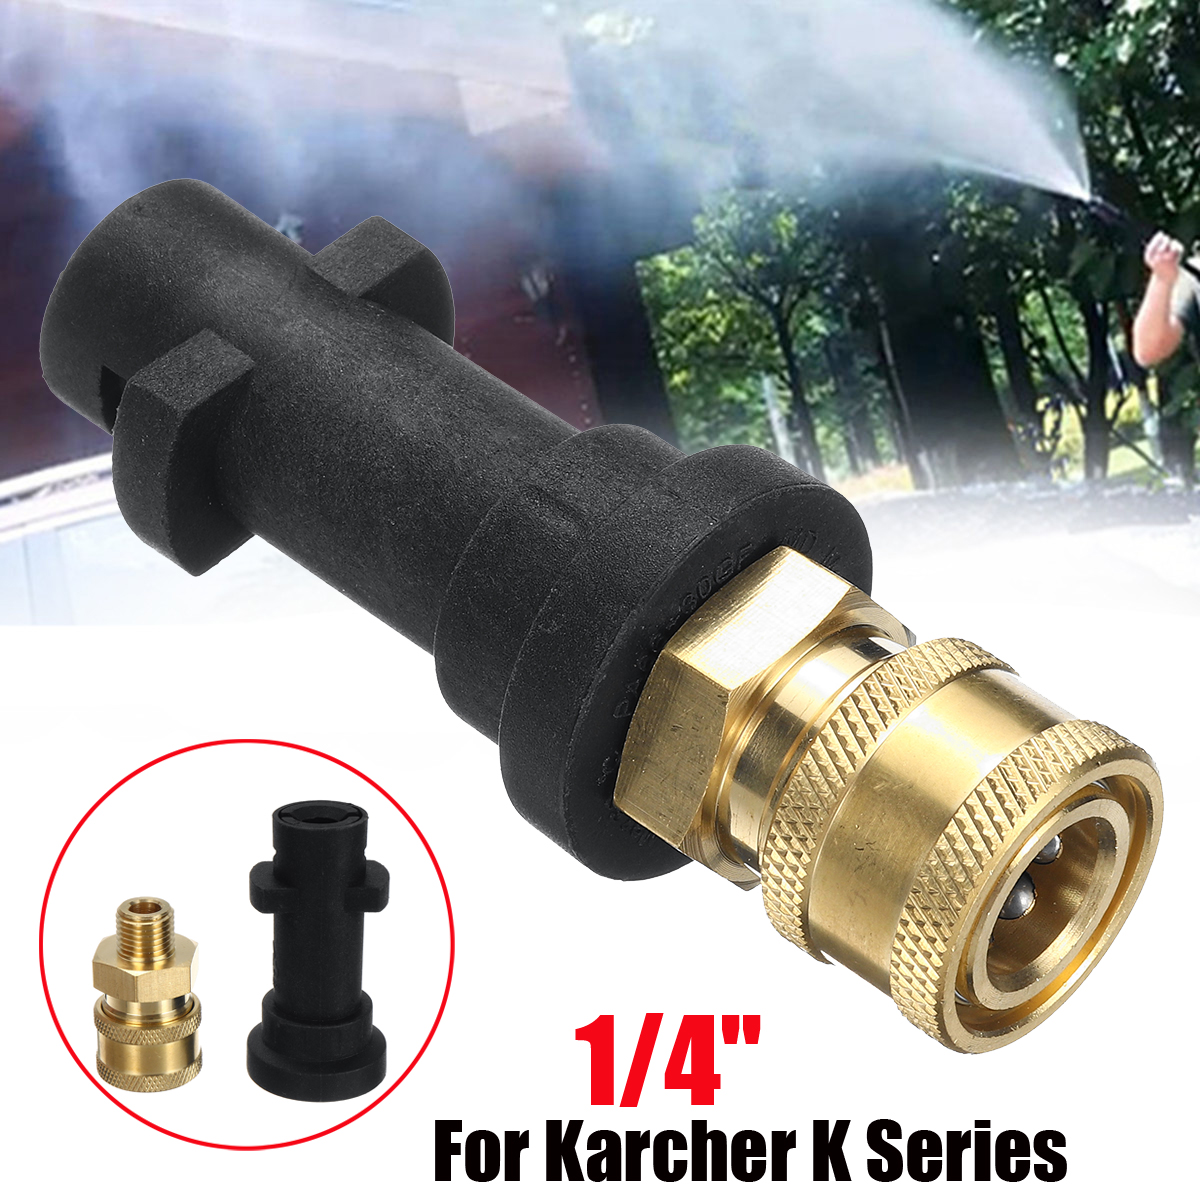 14-Inch-Quick-Connect-Adapters-For-S10-Karcher-K-series-Pressure-Washer-Cleaning-Machine-1456449-1